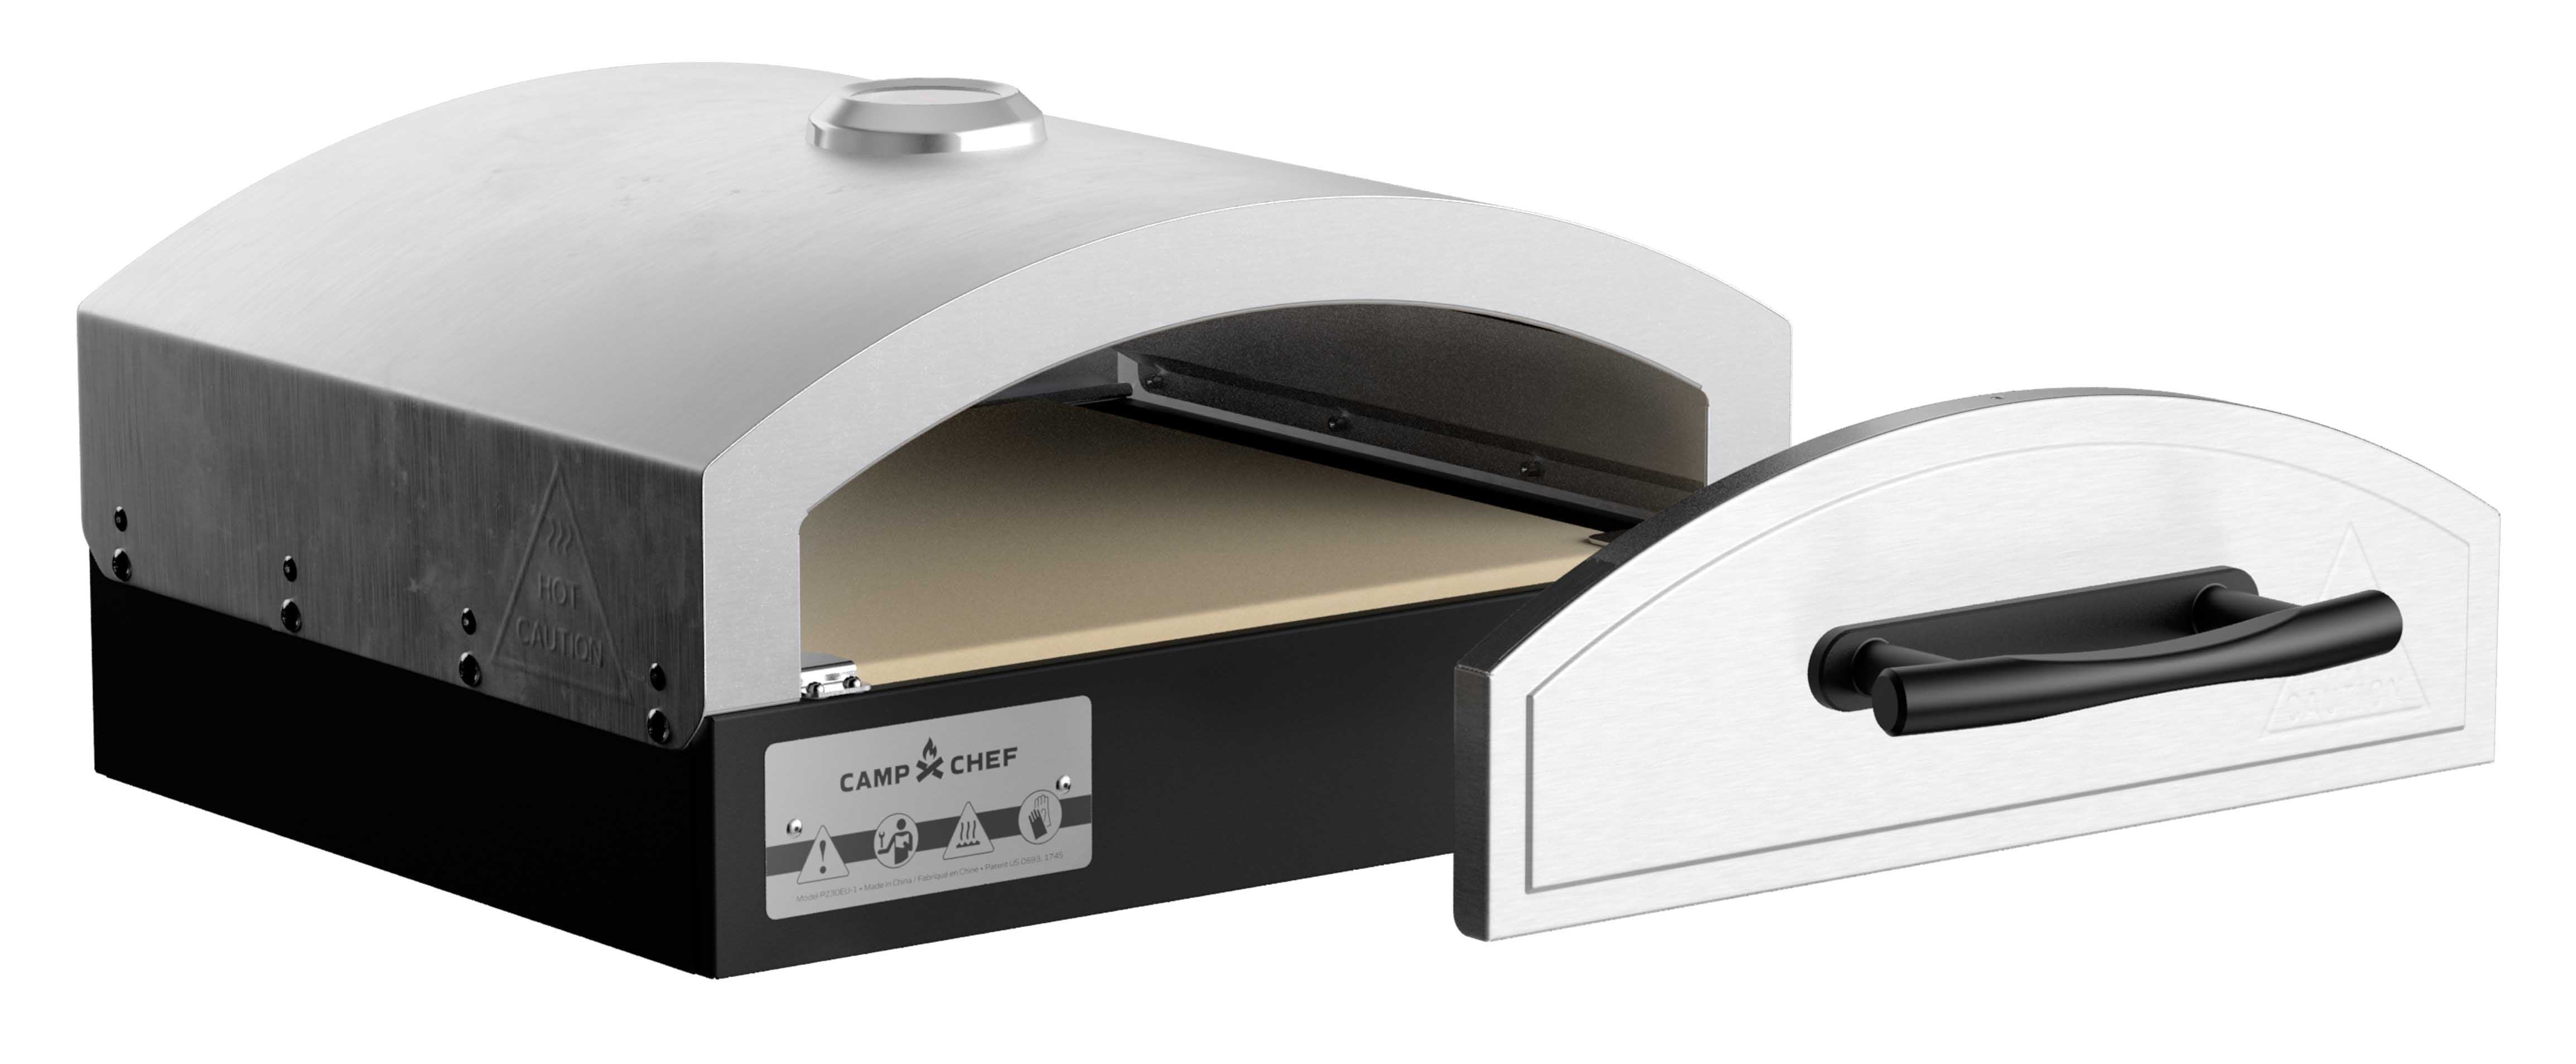 CC3060 Pizza Grill Pan - The Companion Group